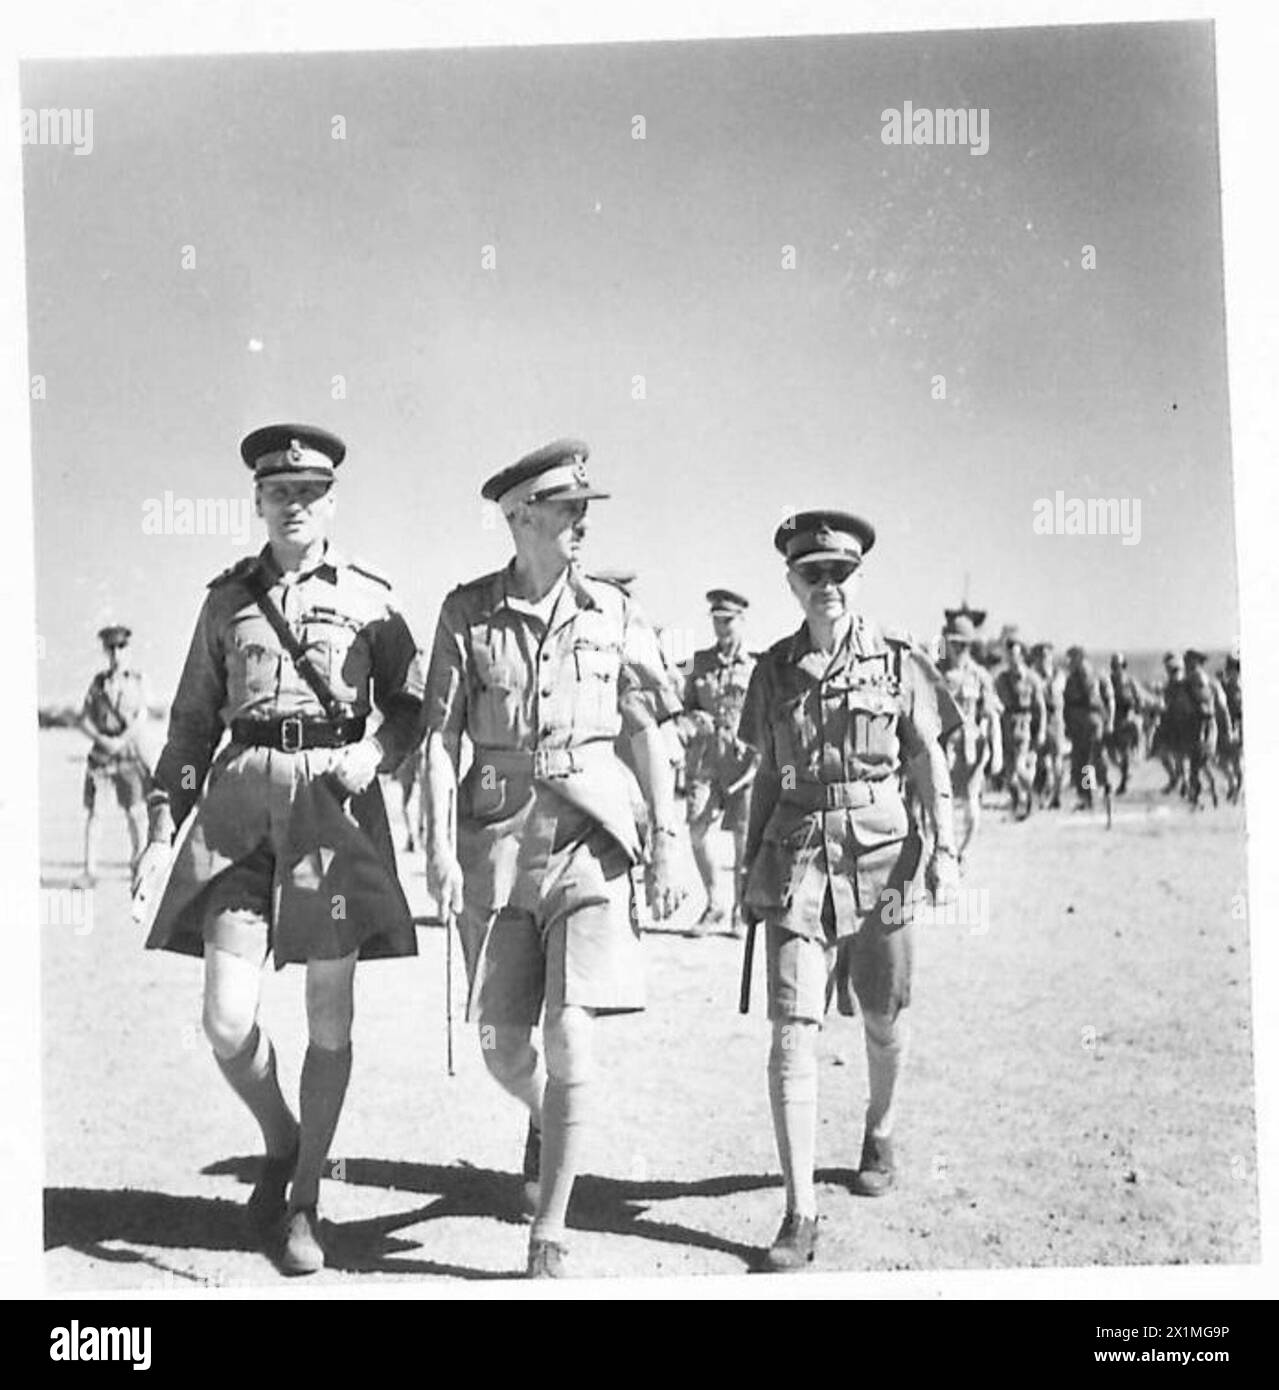 THE GOC-IN-C AND OTHER SENIOR STAFF OFFICERS VISIT A DEMONSTRATION IN THE DESERT - Left to right:- Gencral Sir Claude Auchinleck Major General H.B.W. Hughes, Engineer in Chief, M.E. Lieut. General Sir James Marshall-Cornwall, GOC., B.T.E, British Army Stock Photo